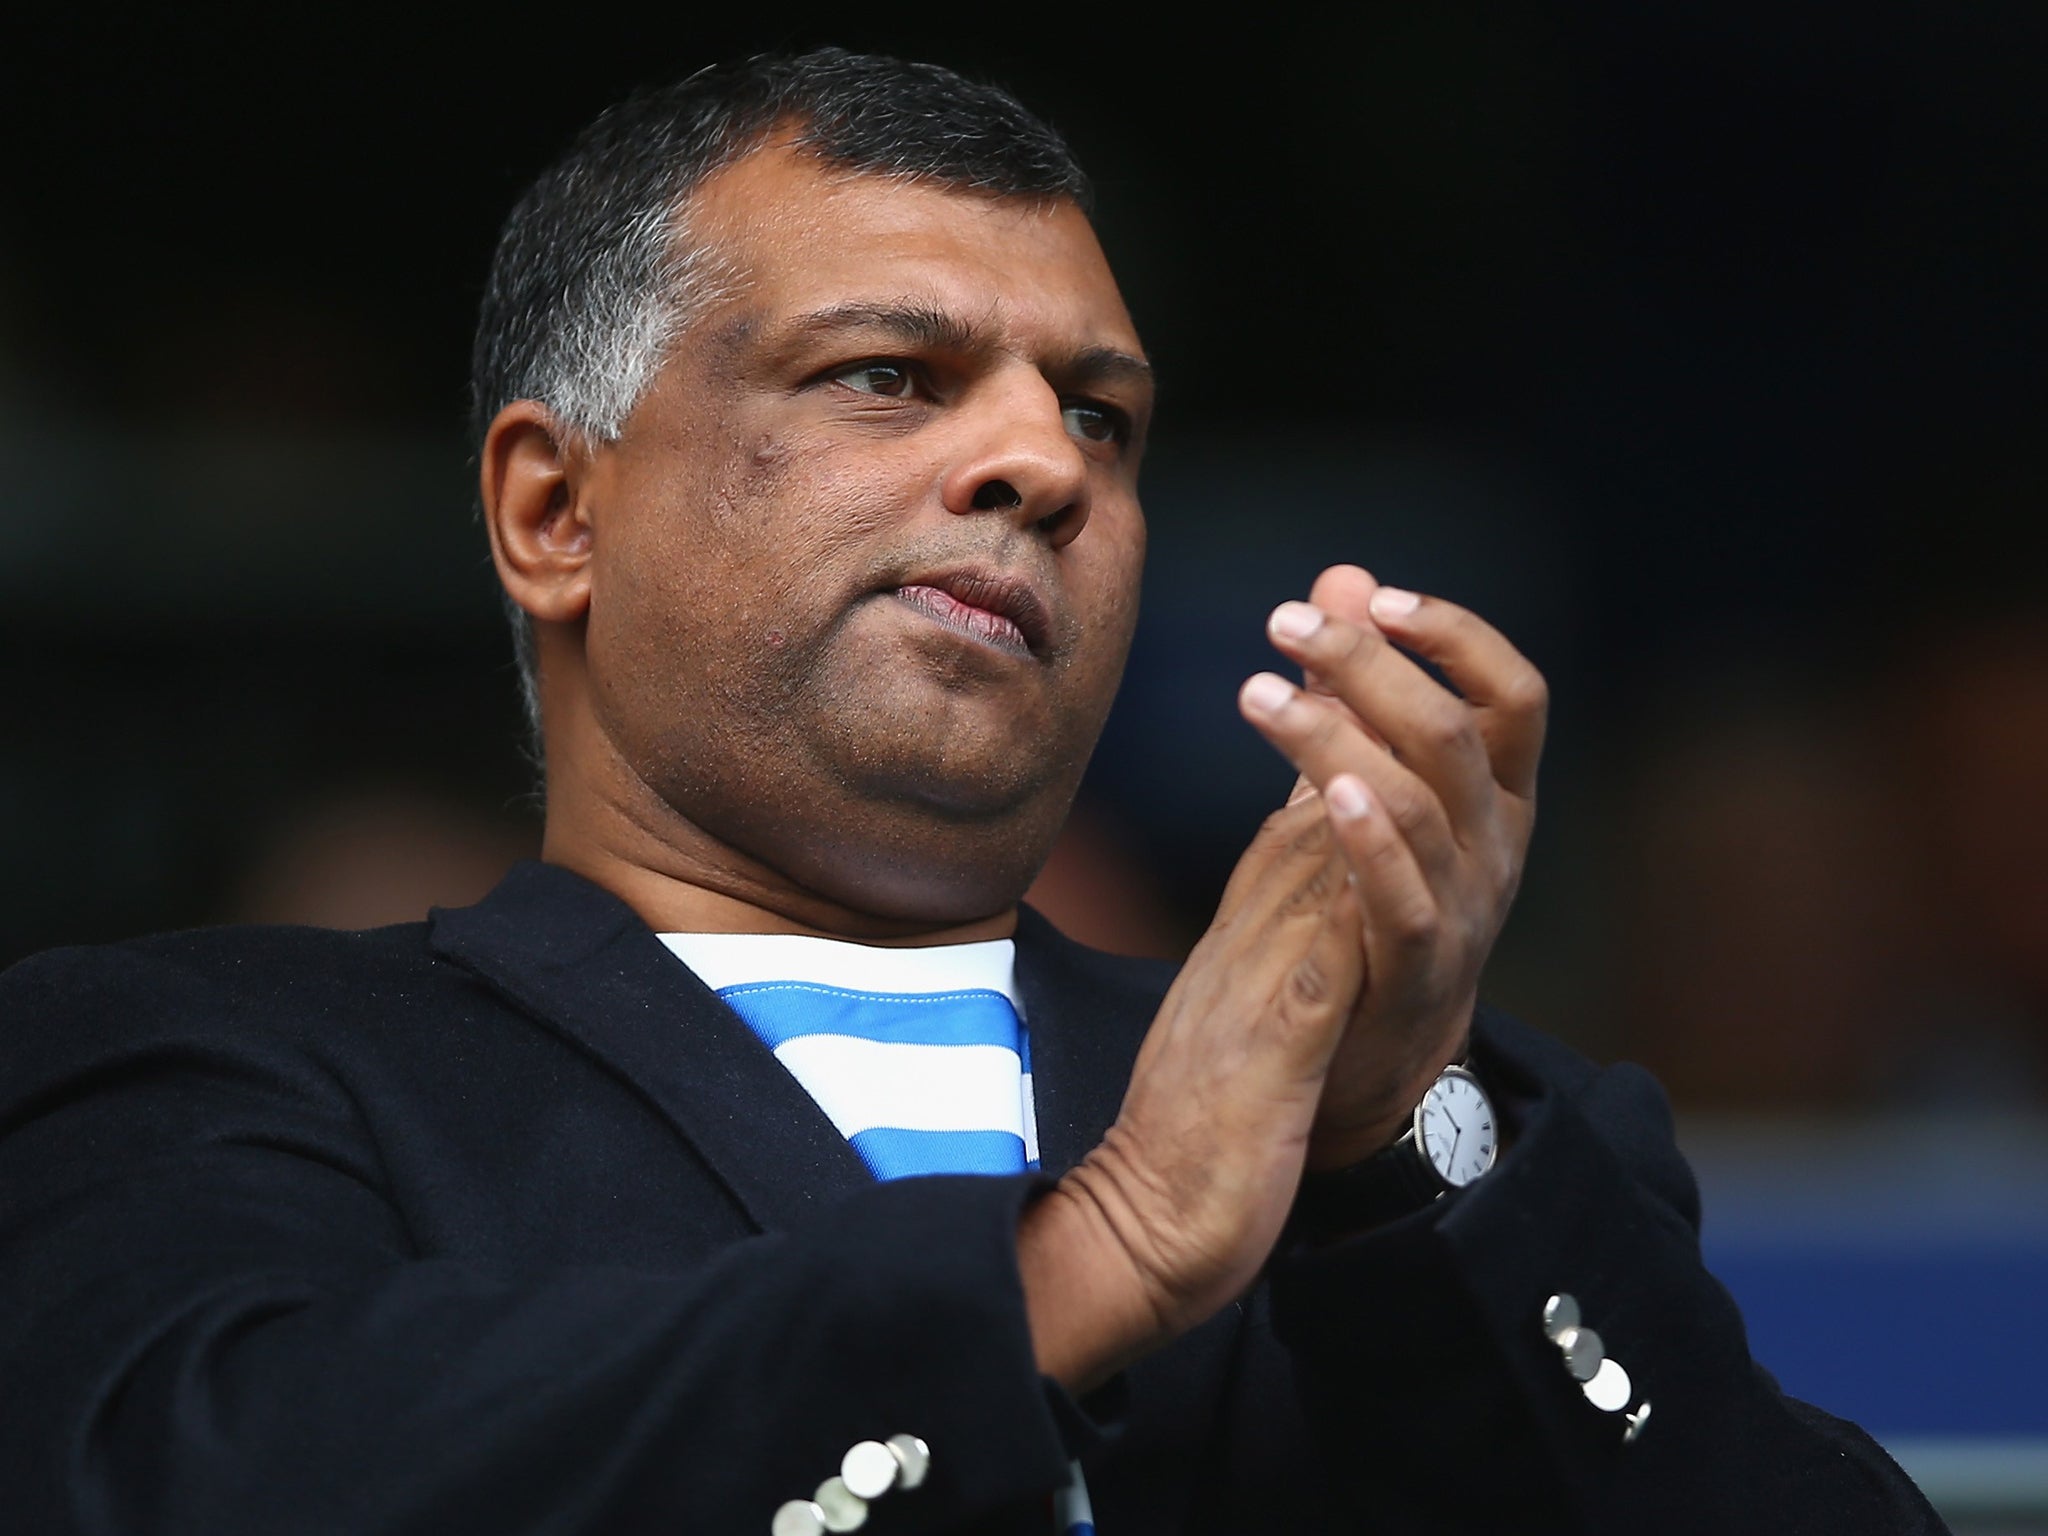 QPR chairman Tony Fernandes looks on from the stands